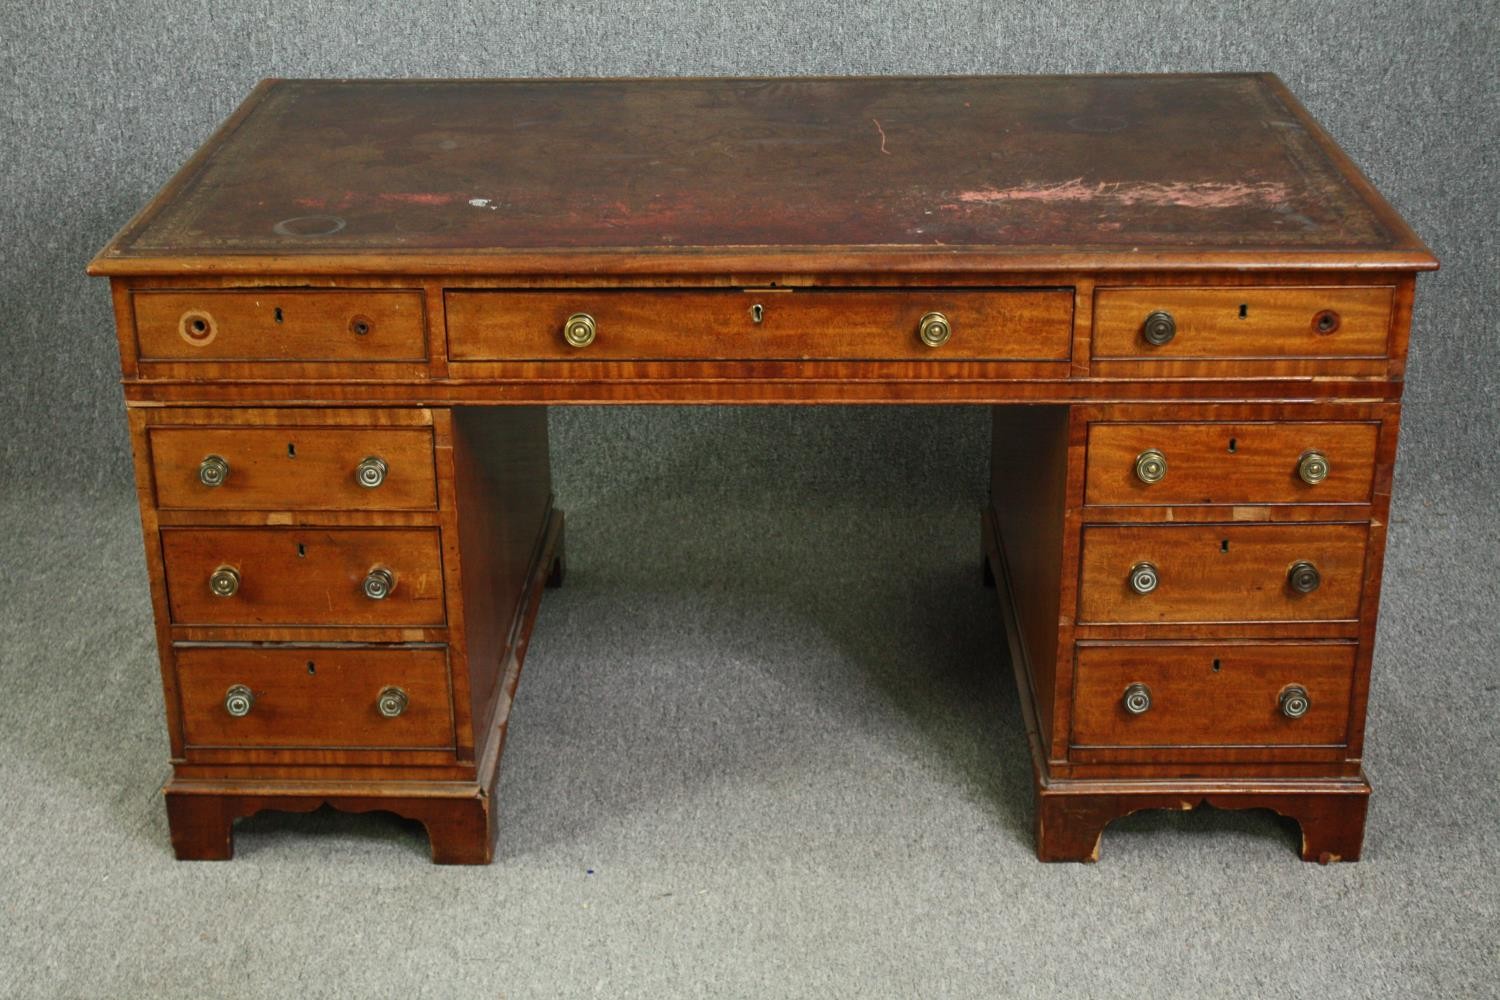 An early Victorian mahogany pedestal desk, with tooled red leather top and matching fitted leather